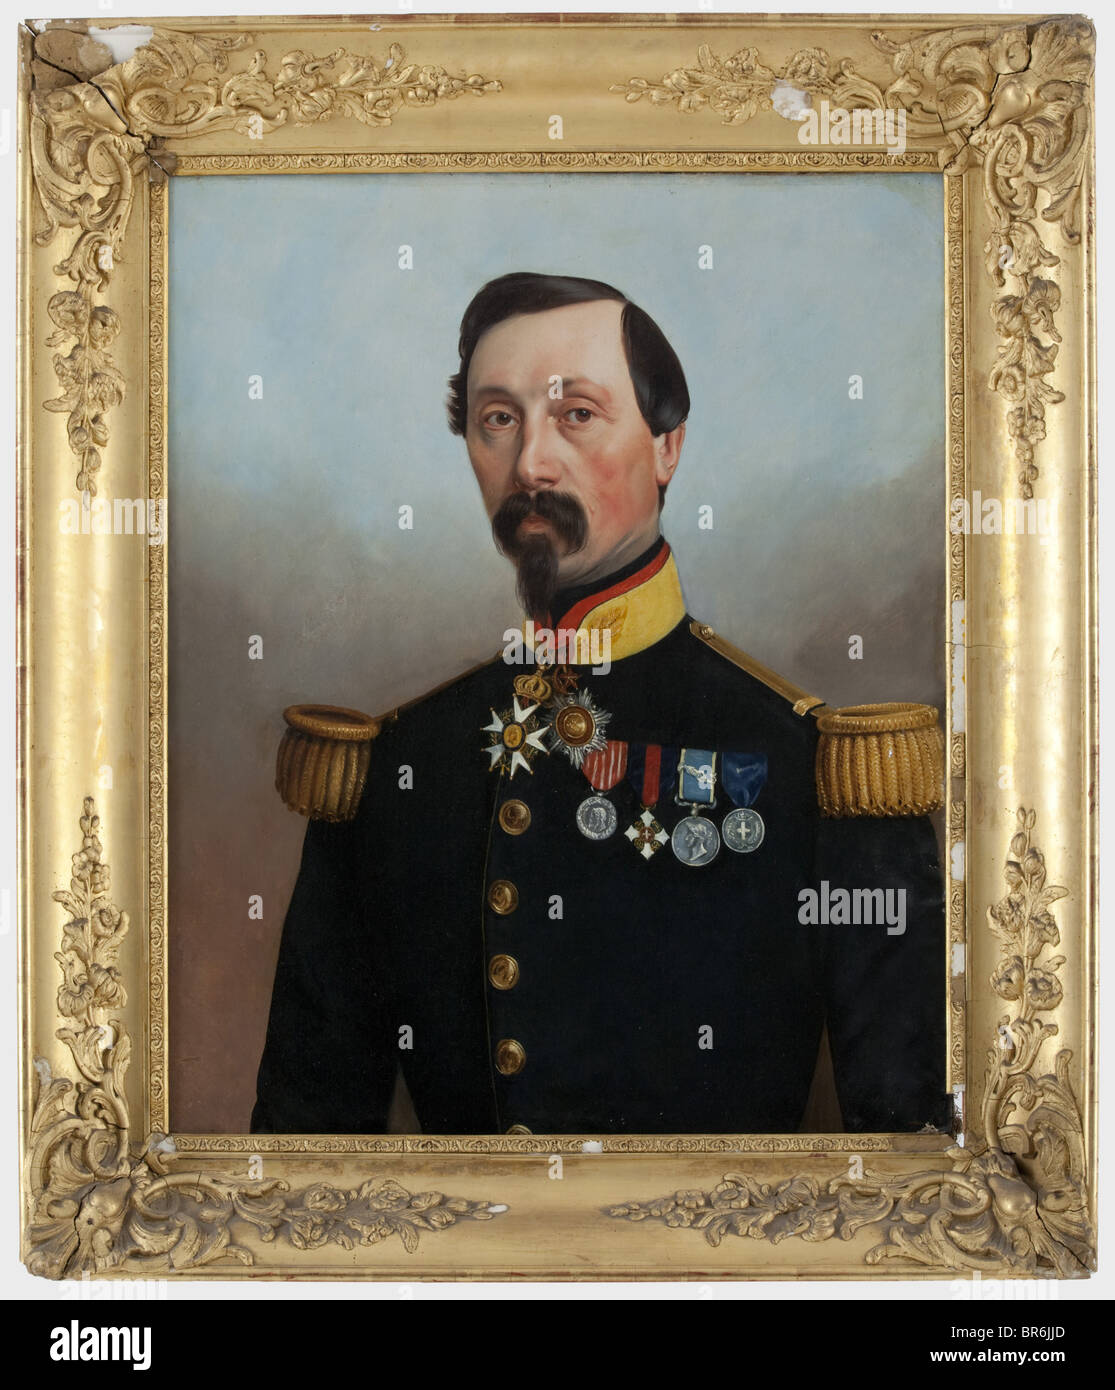 A portrait of an officer, 2nd Empire. Oil on canvas. Unsigned. Officer of the Emperor's Lifeguard Voltigeur Regiment in a tunic with epaulettes and decorations: France, Commander's Cross of the Order of the Legion d'Honneur. Turkey, Medjidie Order. France, Medal for the Italian Campaign. Savoy, Knight's Cross of the Military Merit Order. Great Britain, Crimean Campaign Medal. Italy, Medal for Bravery. Damaged gold plaster frame. Picture dimensions 76 x 60 cm. Framed dimensions 94 x 80 cm. fine arts, people, 19th century, object, objects, stills, clipp, Artist's Copyright has not to be cleared Stock Photo